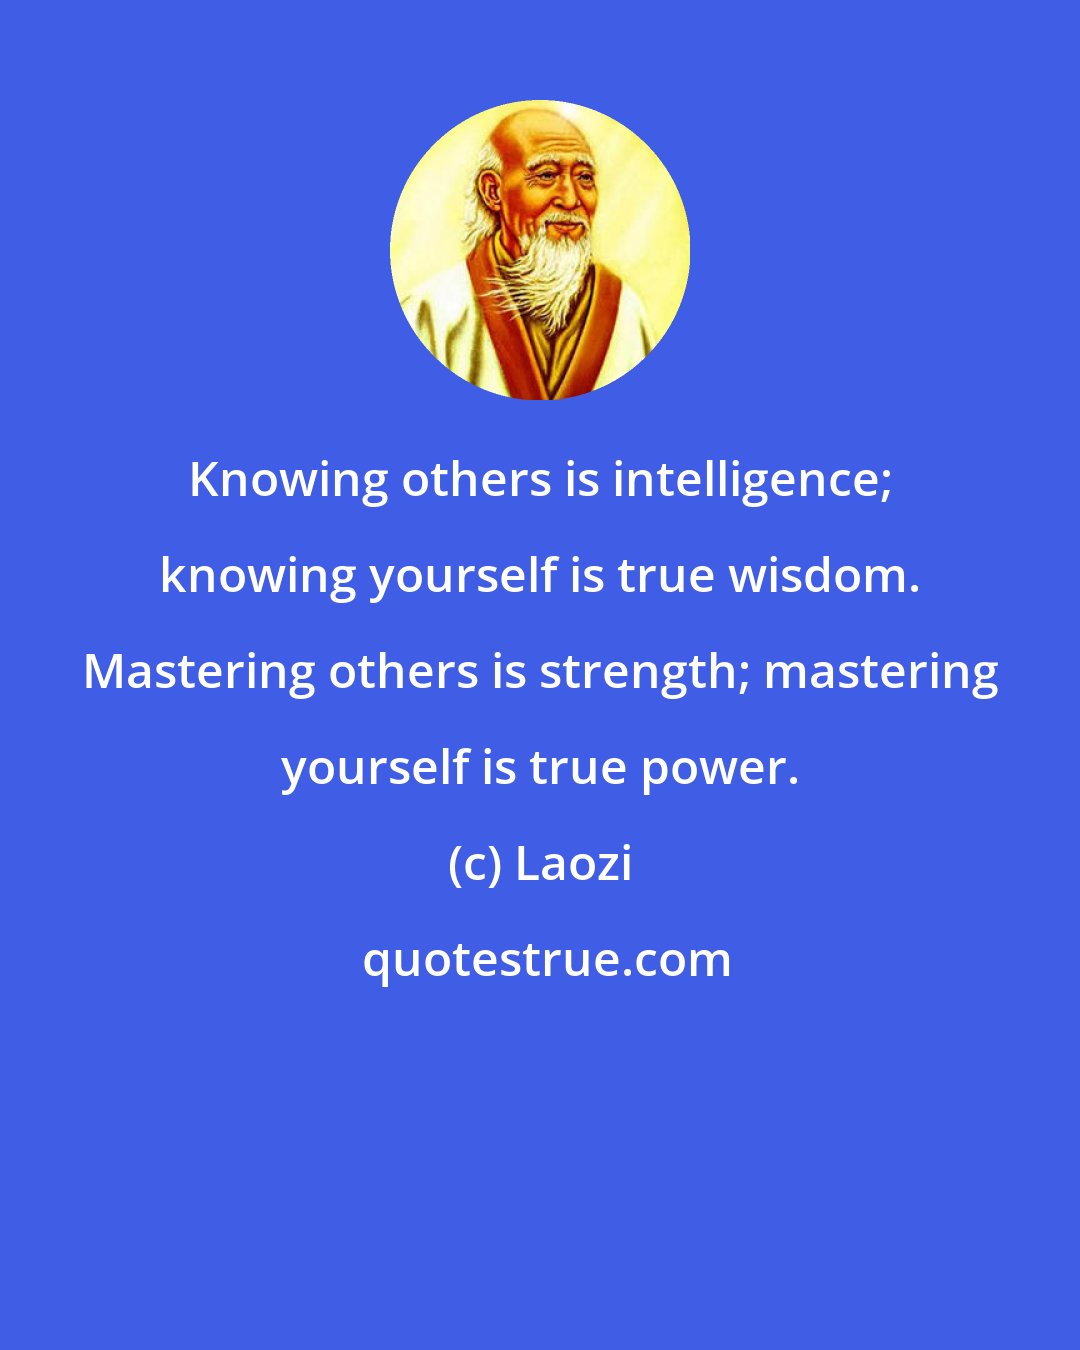 Laozi: Knowing others is intelligence; knowing yourself is true wisdom. Mastering others is strength; mastering yourself is true power.